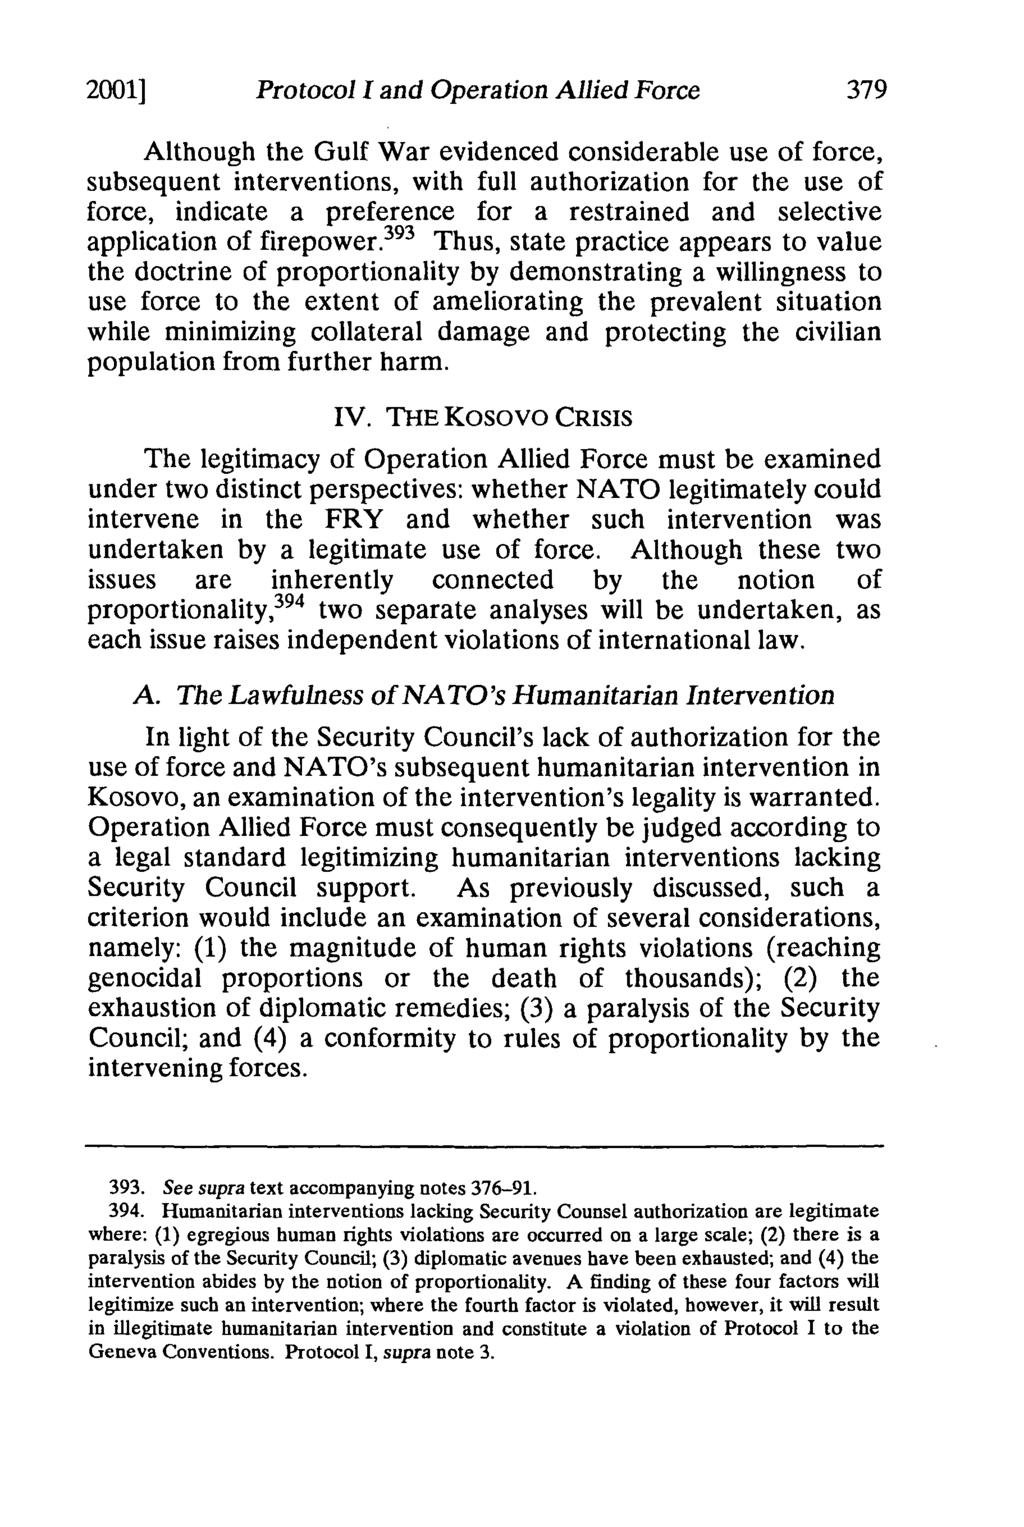 20011 Protocol I and Operation Allied Force Although the Gulf War evidenced considerable use of force, subsequent interventions, with full authorization for the use of force, indicate a preference